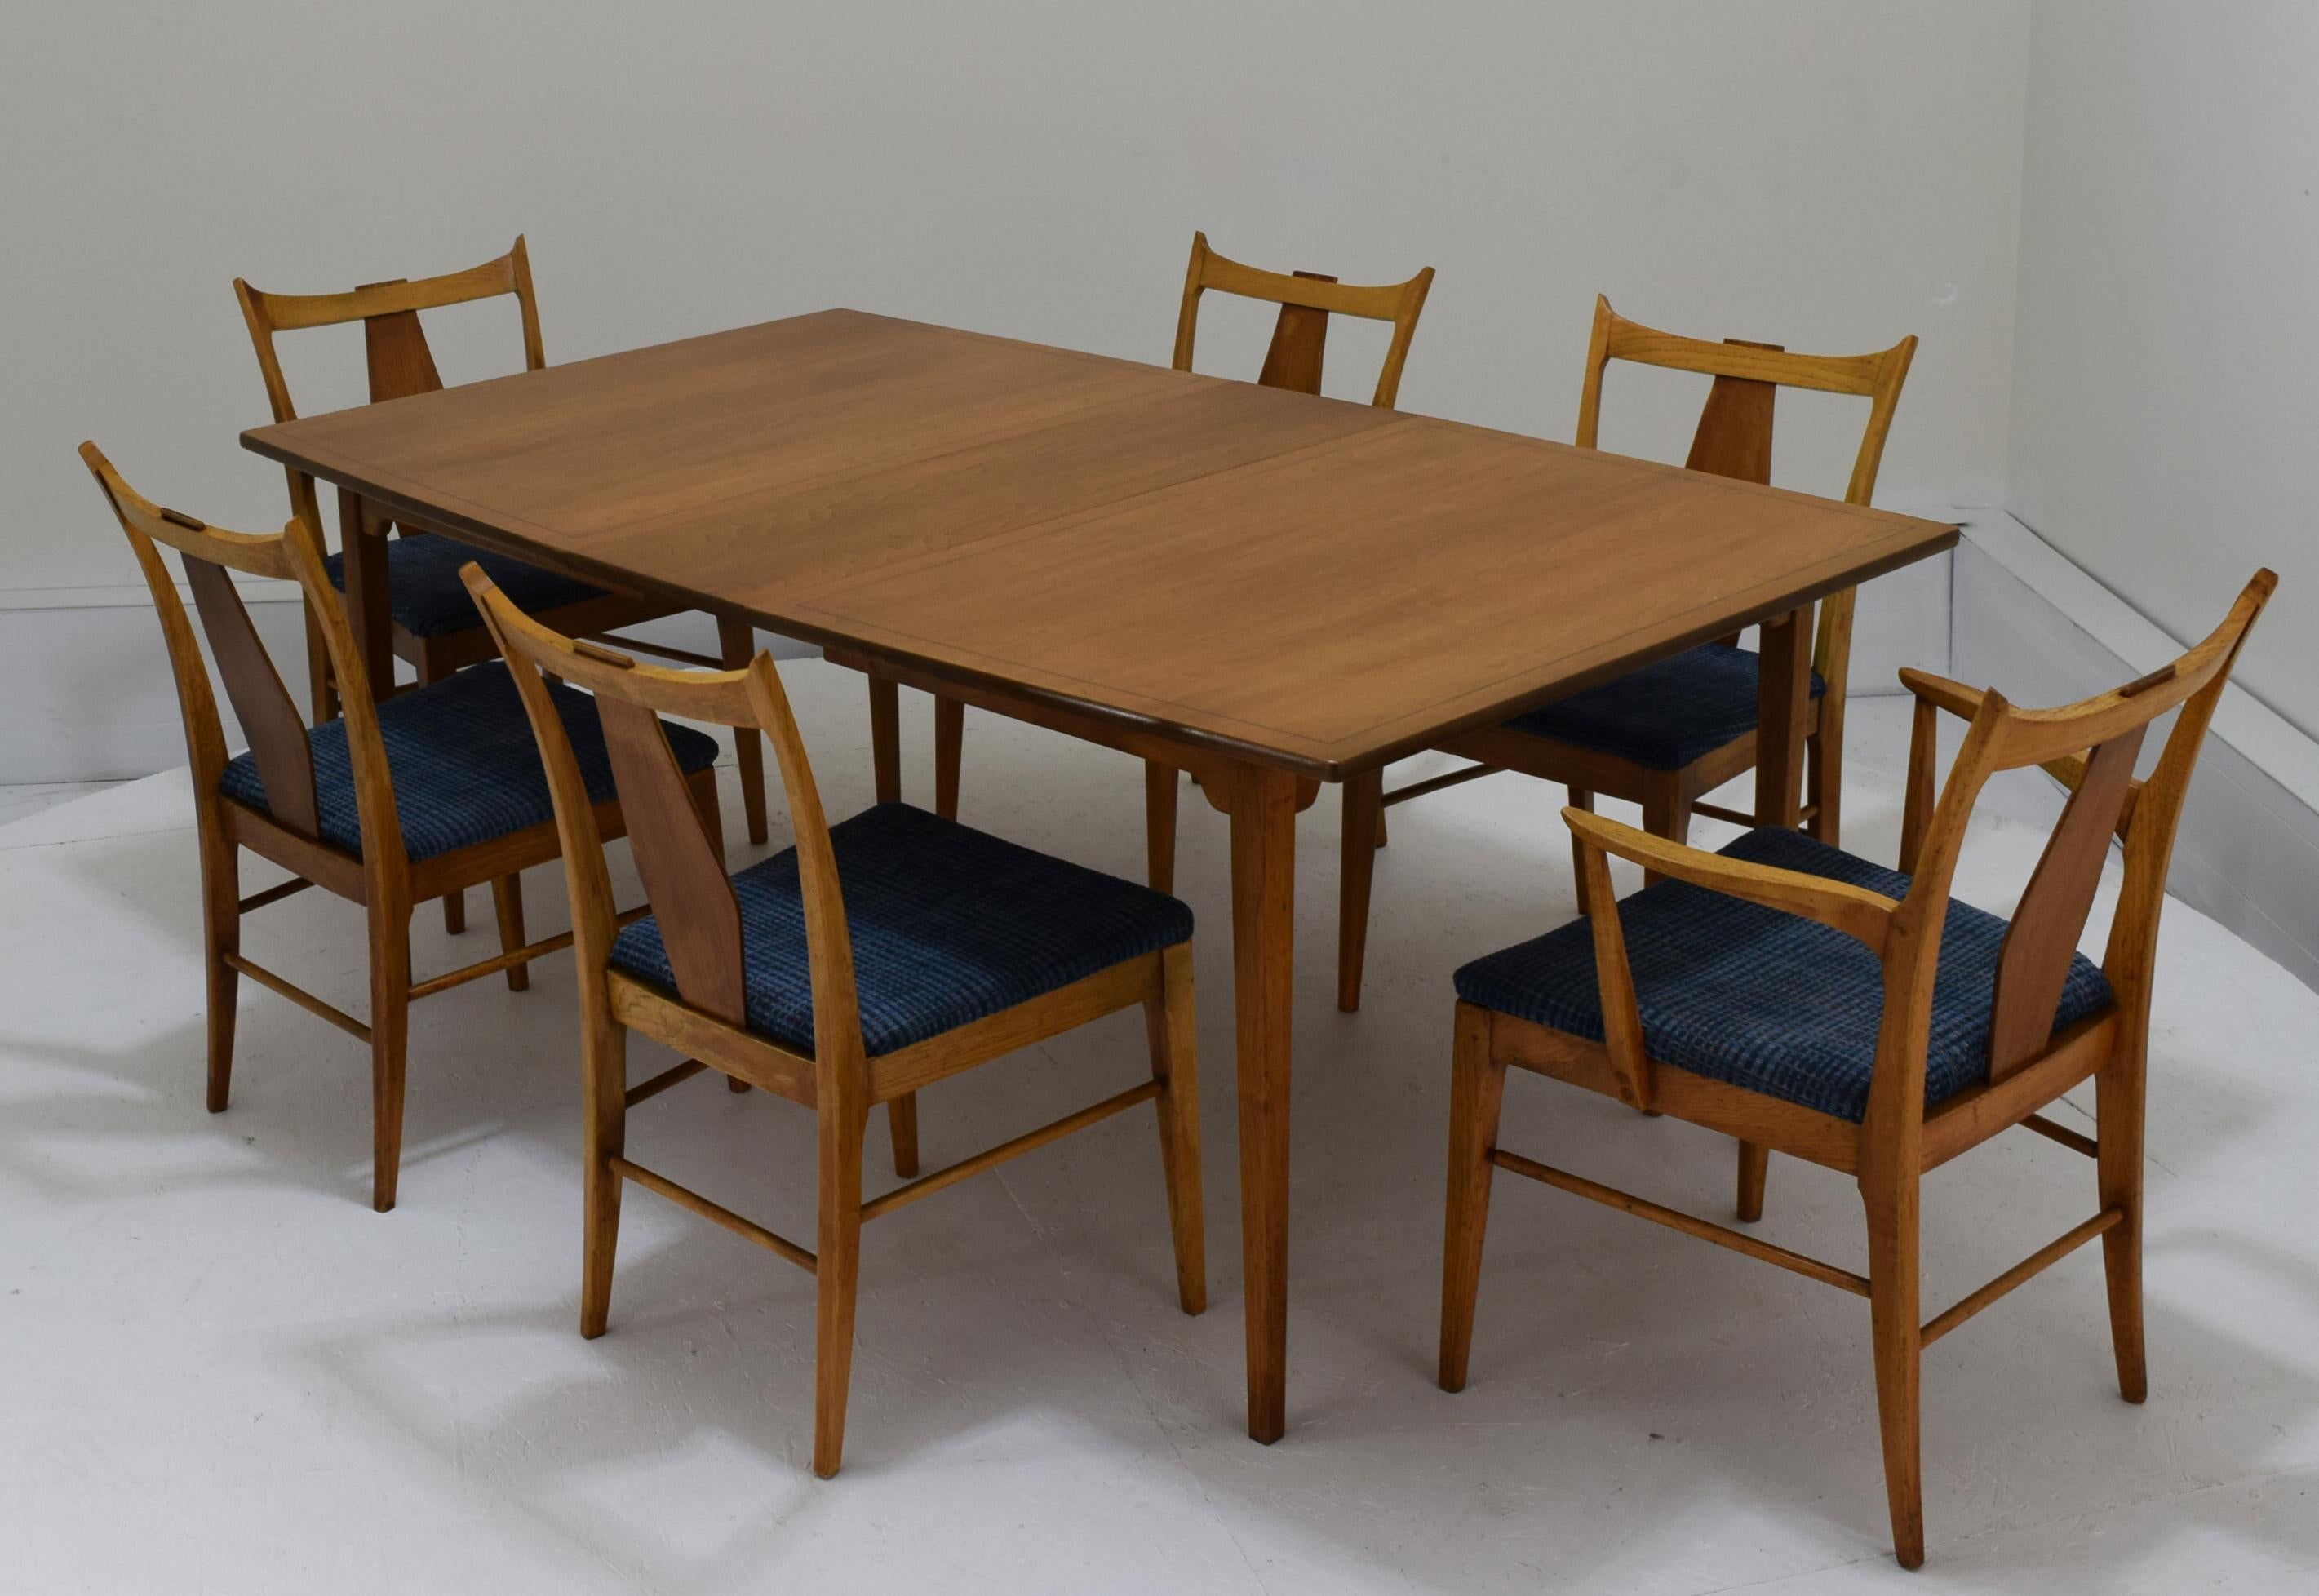 Produced by BF Huntley, circa 1950s. A charming suite with minute details combing subtle arts and crafts elements to an American modernist approach. Subtle flaring of the table top with an ebony insert running along the border, chairs with all edges